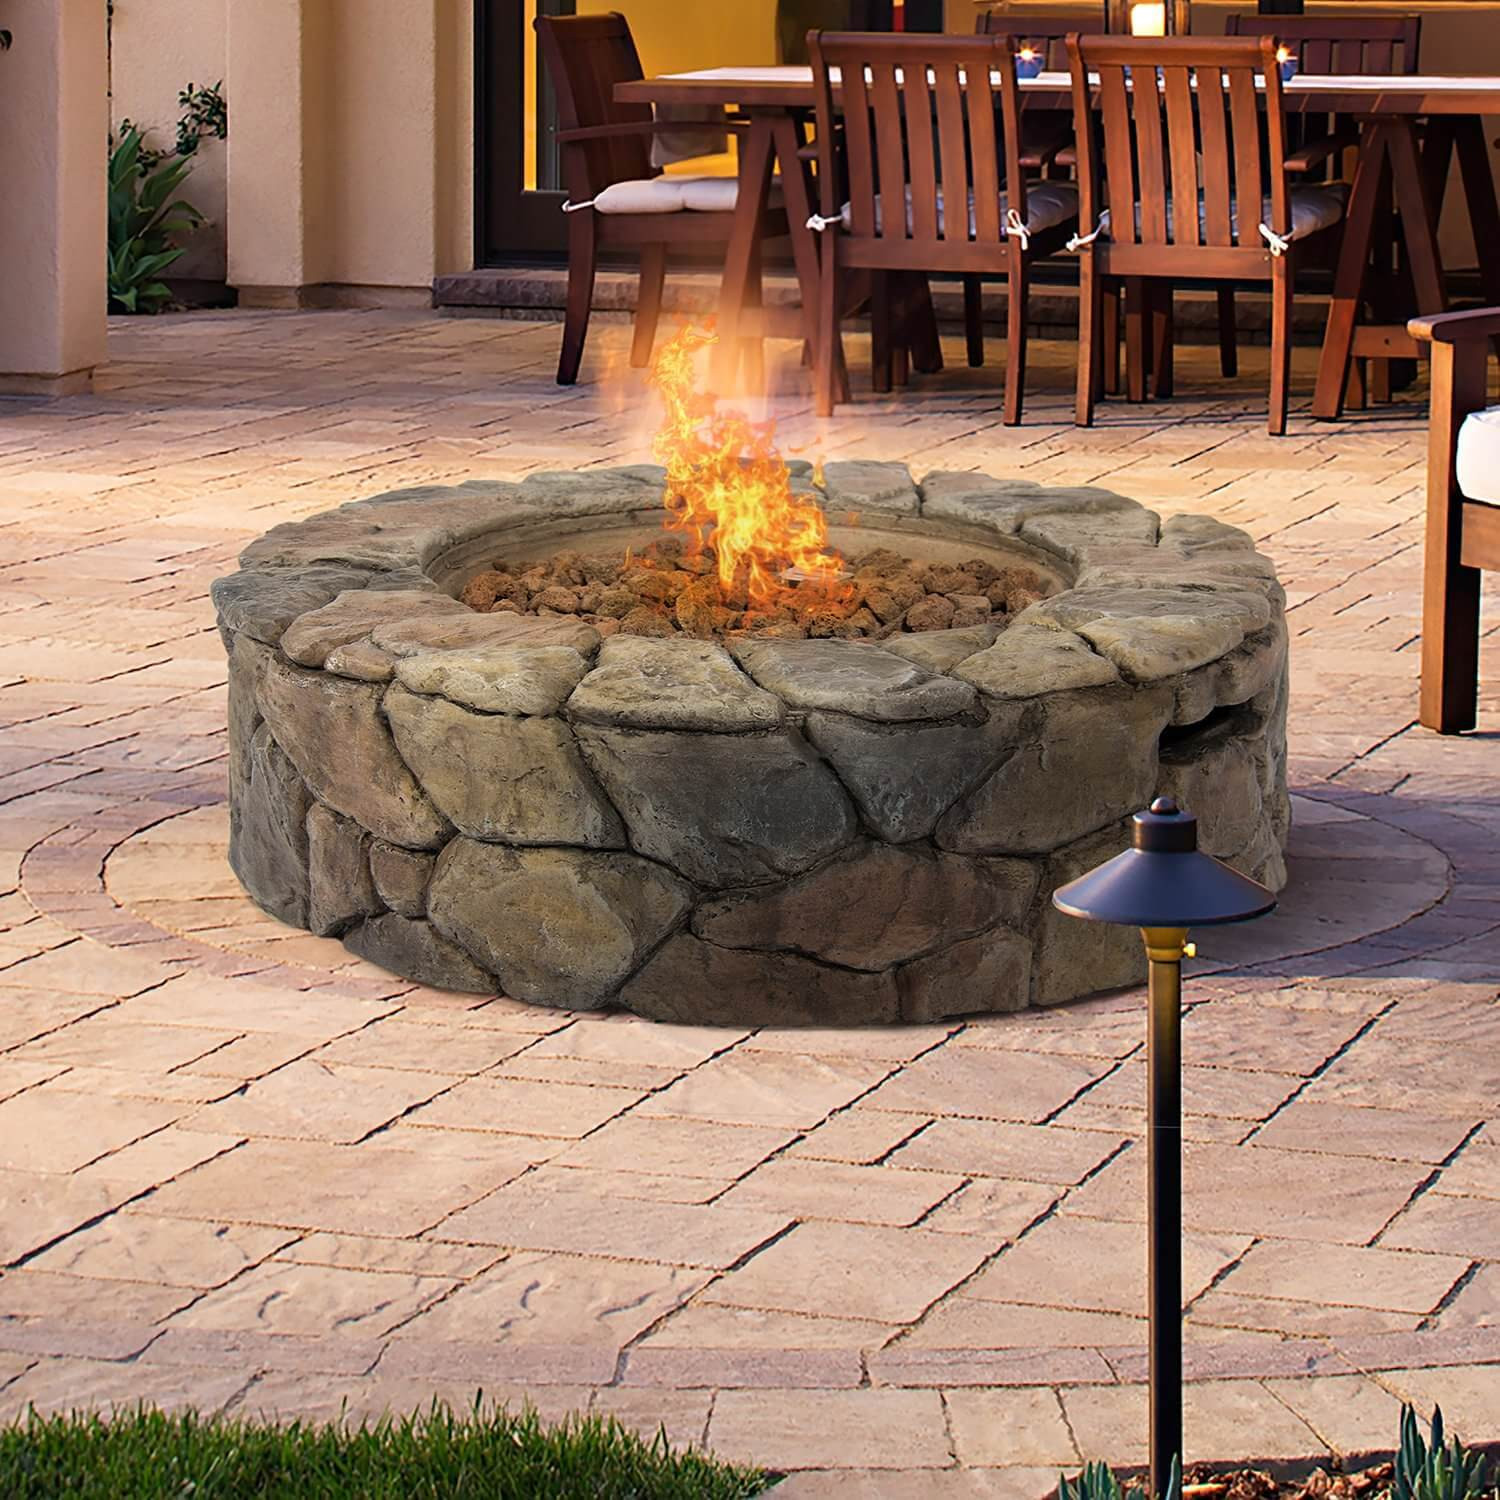 Propane Patio Fire Pit
 Top 15 Types of Propane Patio Fire Pits with Table Buying